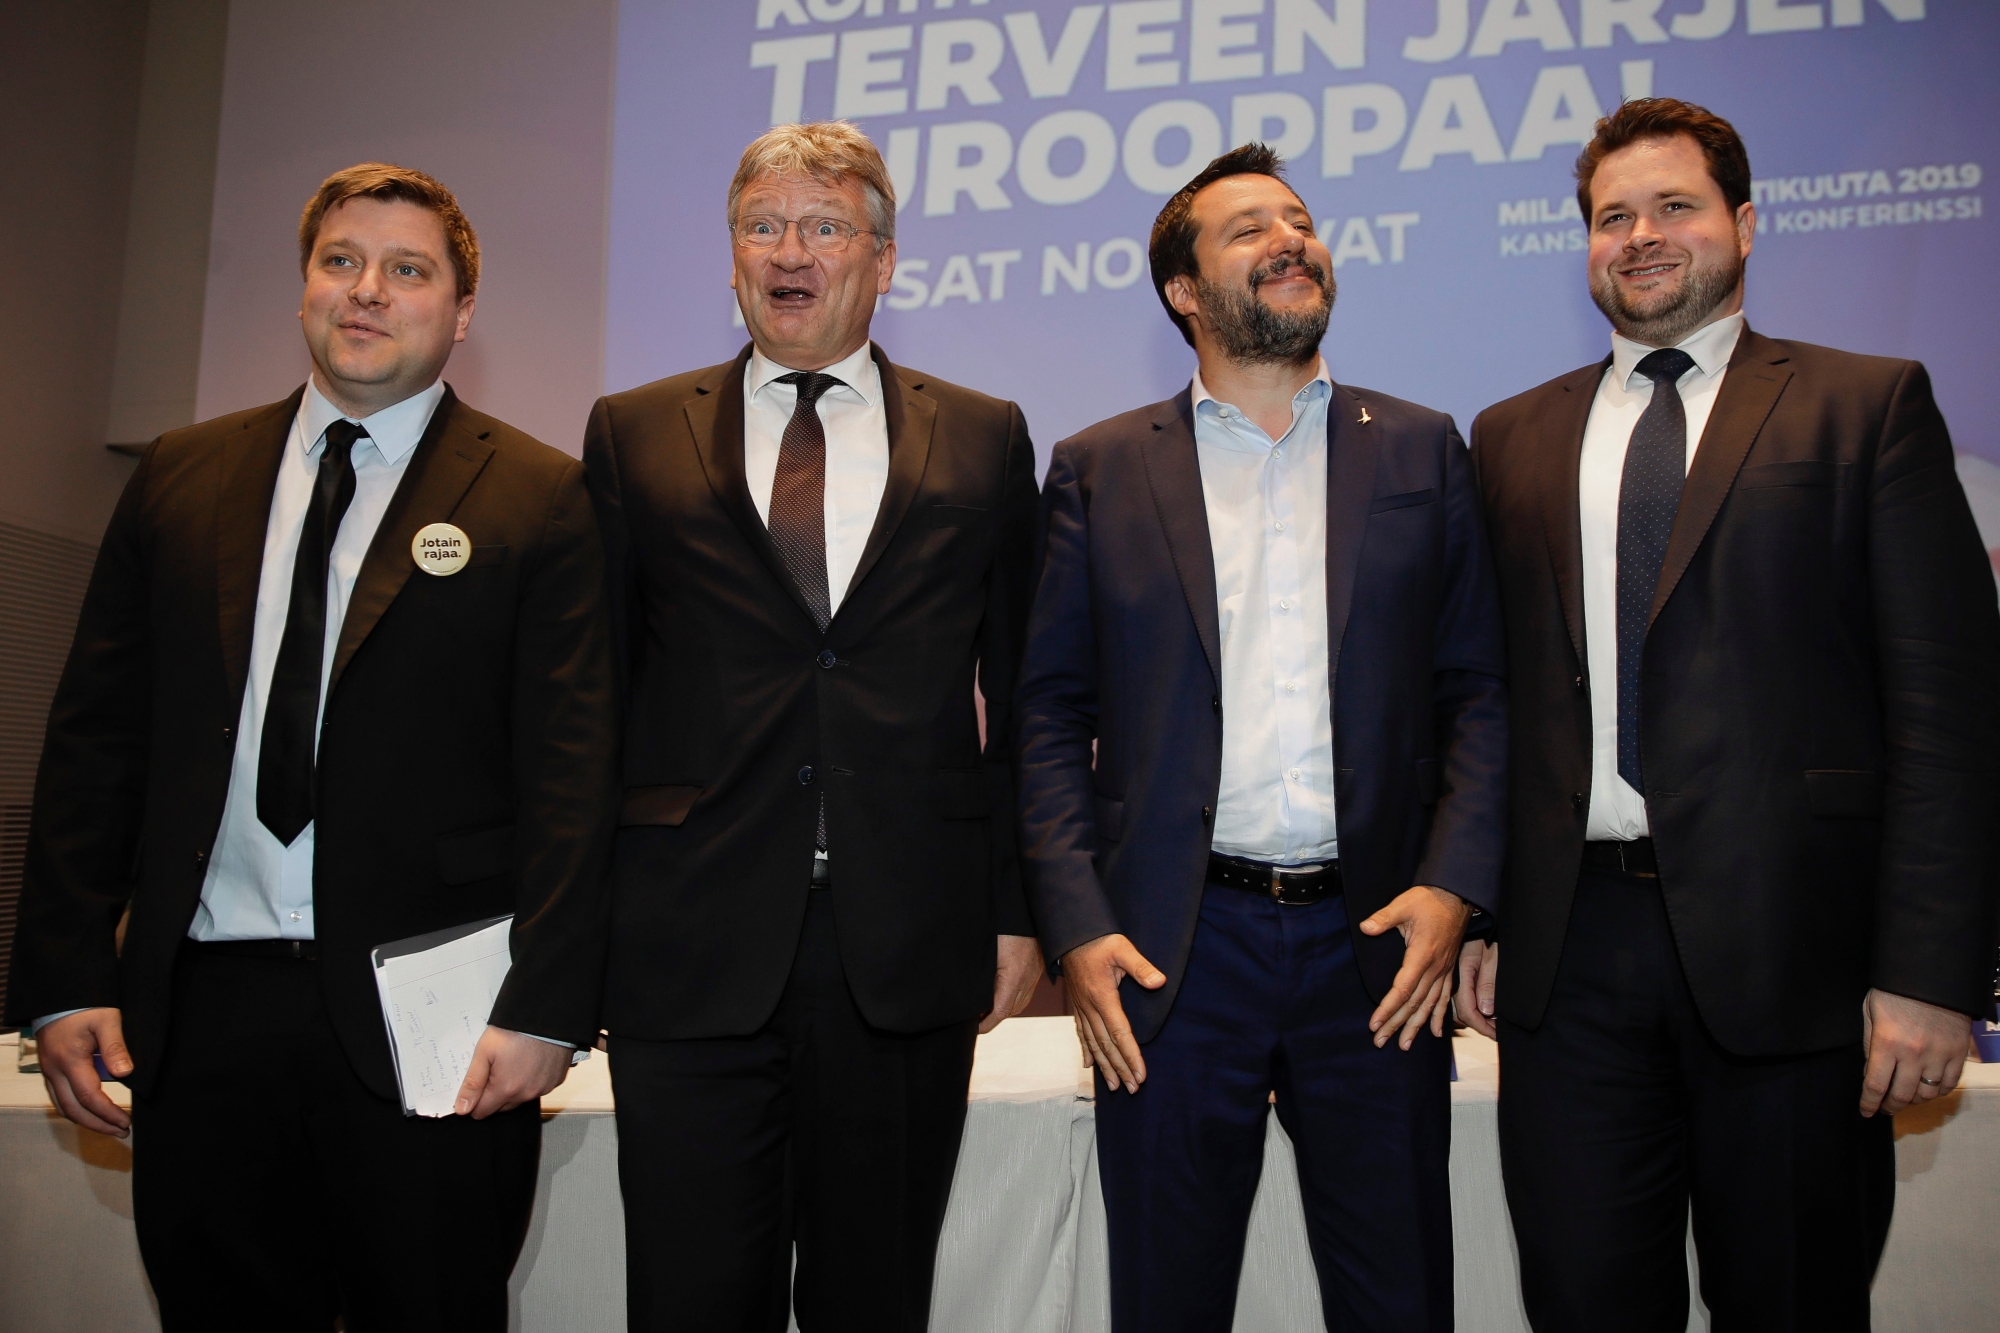 From left, Olli Kotro, leader of The Finns Party, Jörg Meuthen, leader of Alternative For Germany party, Matteo Salvini, Italian deputy-Premier and leader of the League party, and Anders Vistisen, leader of the Danish People's Party, pose for the media prior to the start of a press conference, in Milan, Monday, April 8, 2019. Salvini, Italy's hard-line vice Premier, is meeting with like-minded leaders of European right-wing party as he seeks to form a broad alliance ahead of the European elections next month. (AP Photo/Luca bruno) Italy Europe Right Unites